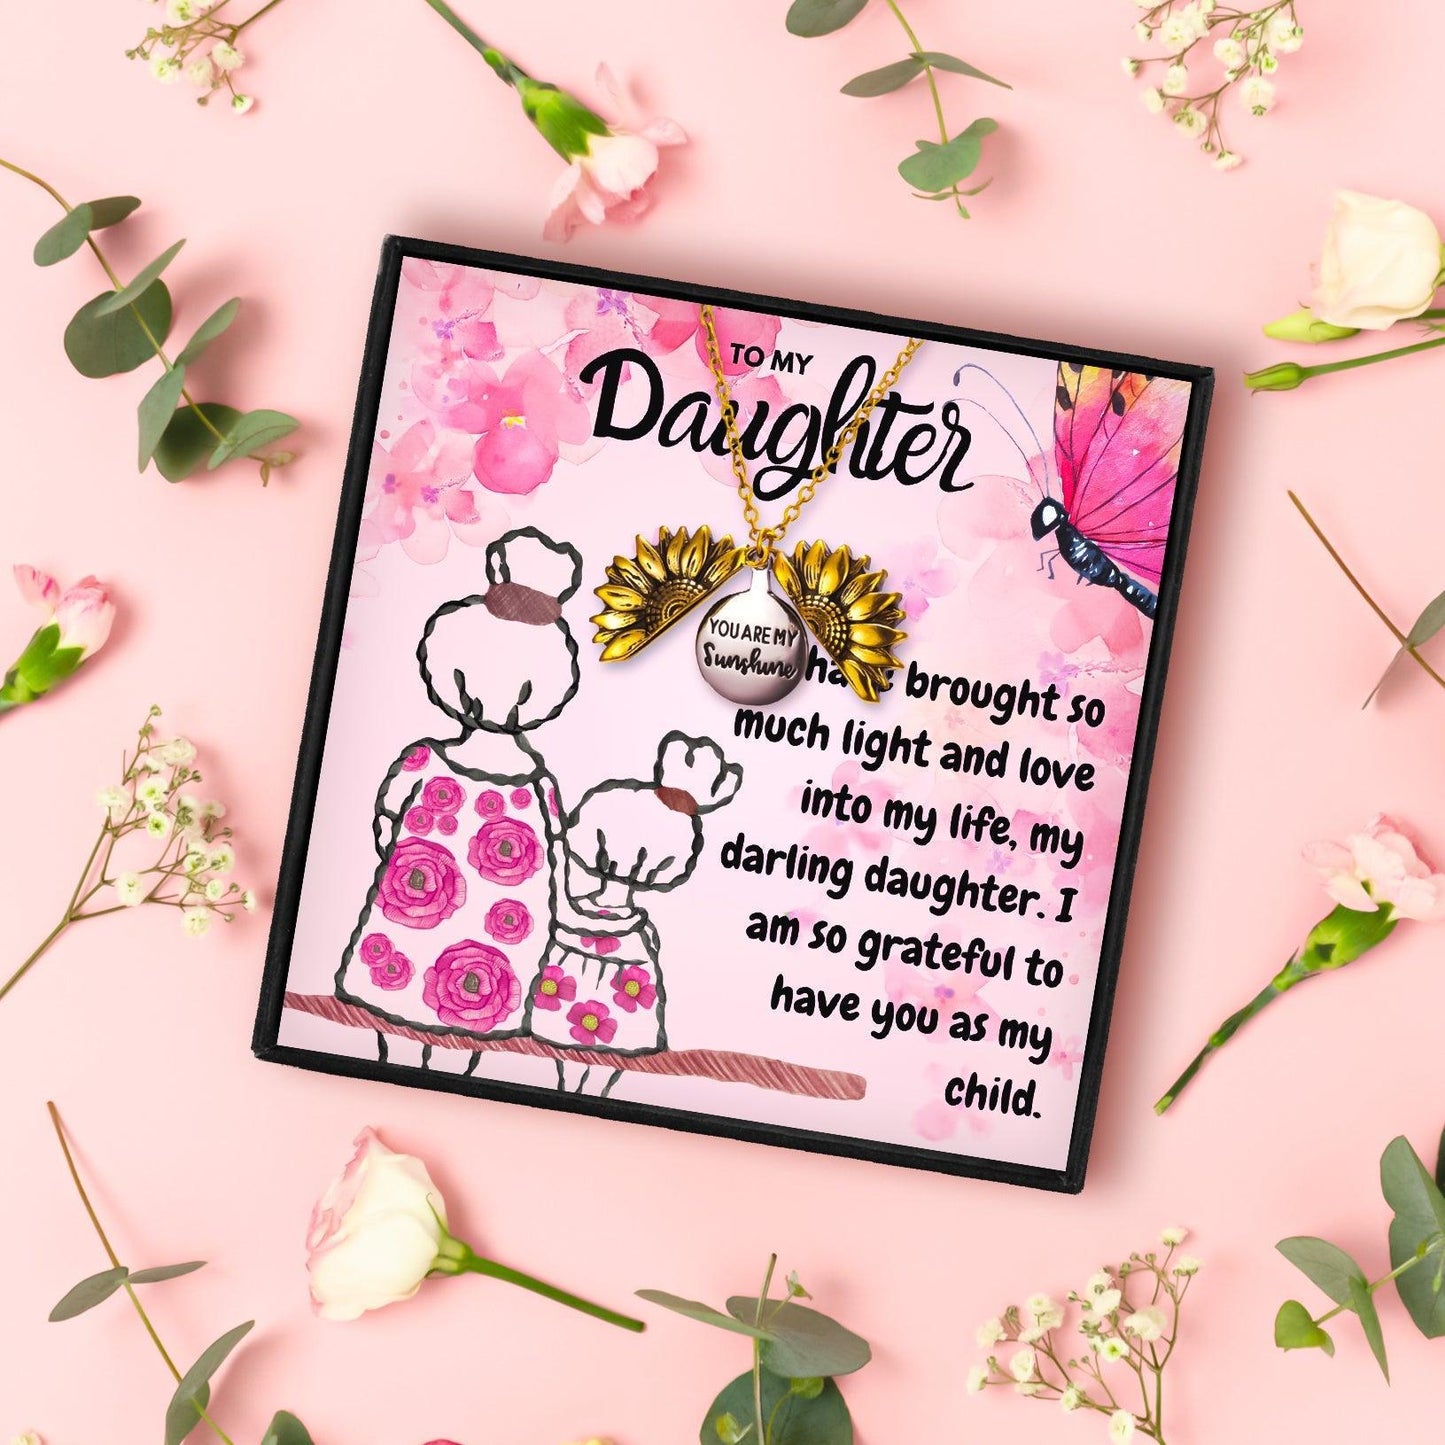 From Mom to Daughter Sunflower Necklace for Christmas 2023 | From Mom to Daughter Sunflower Necklace - undefined | daughter gift ideas, Daughter Necklace, Meaningful Daughter Necklaces, Mother Daughter Necklace, To my daughter necklace, To my daughter necklace from mom | From Hunny Life | hunnylife.com